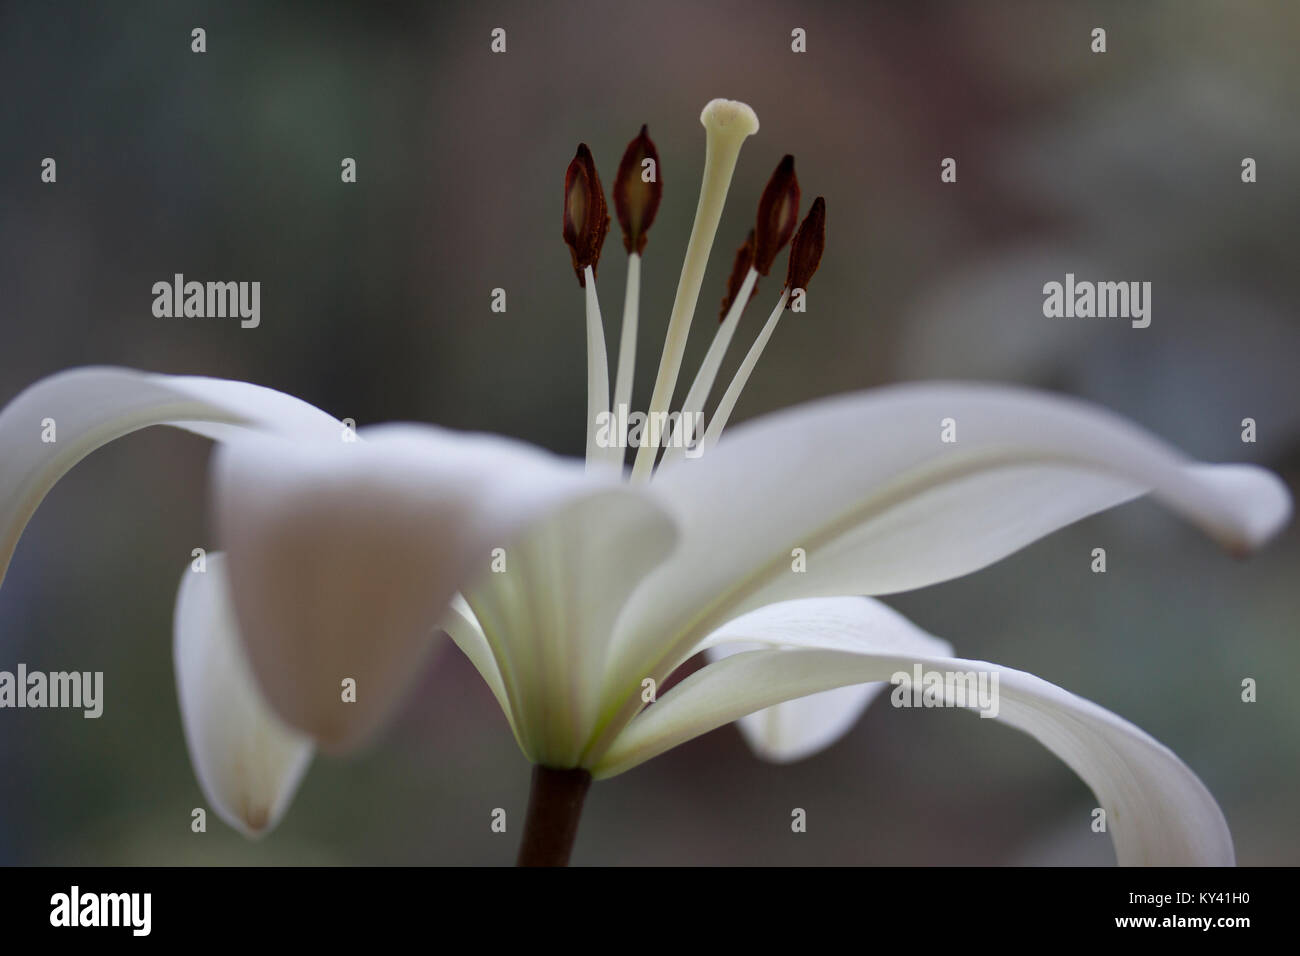 White lily with boke background. Bloom fills the frame with soft focus petals and sharp view of stigma and stamens. The underside of bloom in visible. Stock Photo